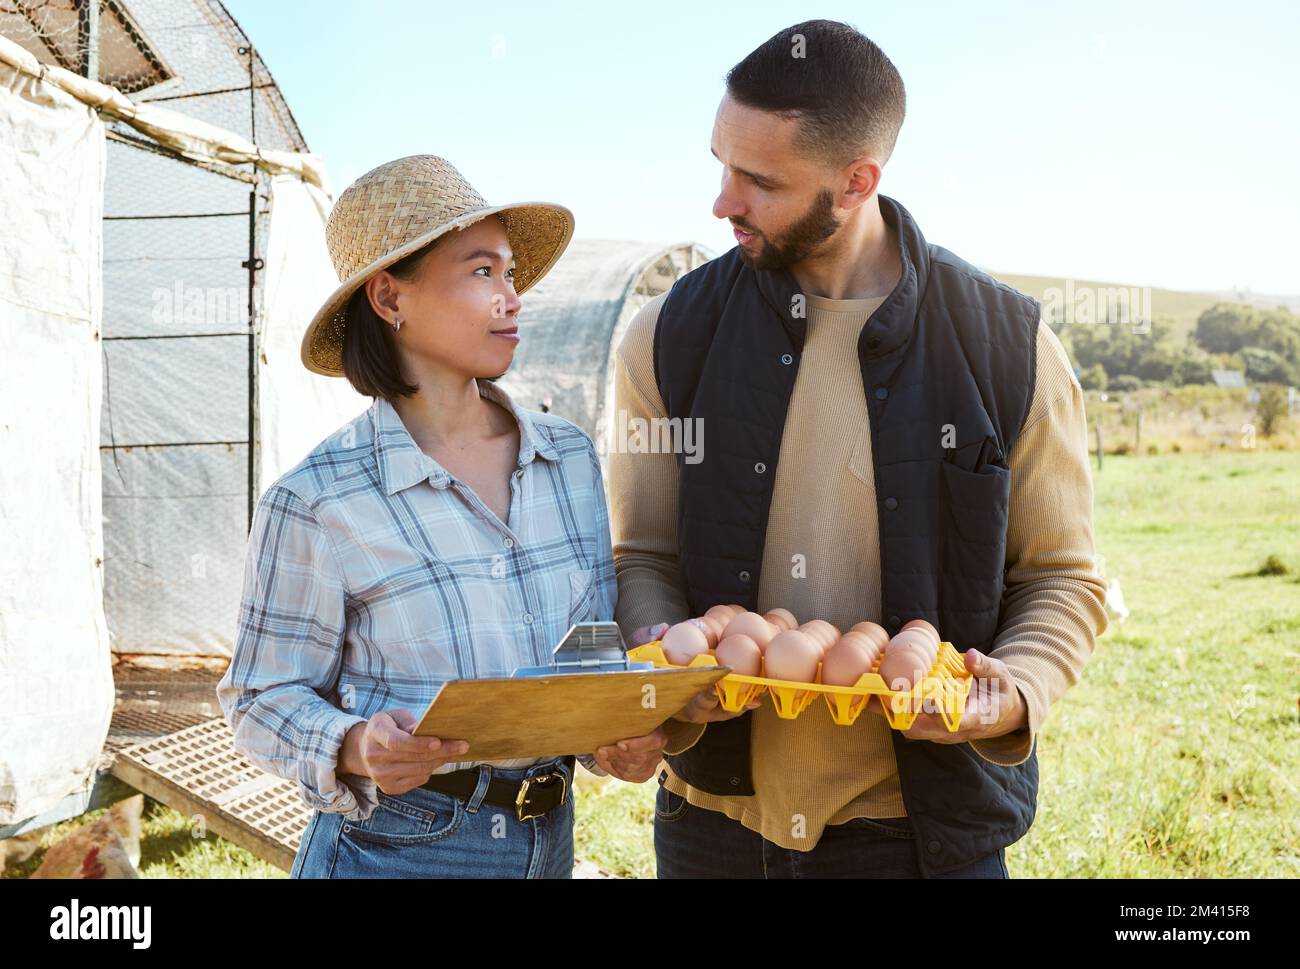 Farmer, man and woman for egg inspection, agriculture or production at poultry farm in countryside. Farming team, chicken product or quality assurance Stock Photo